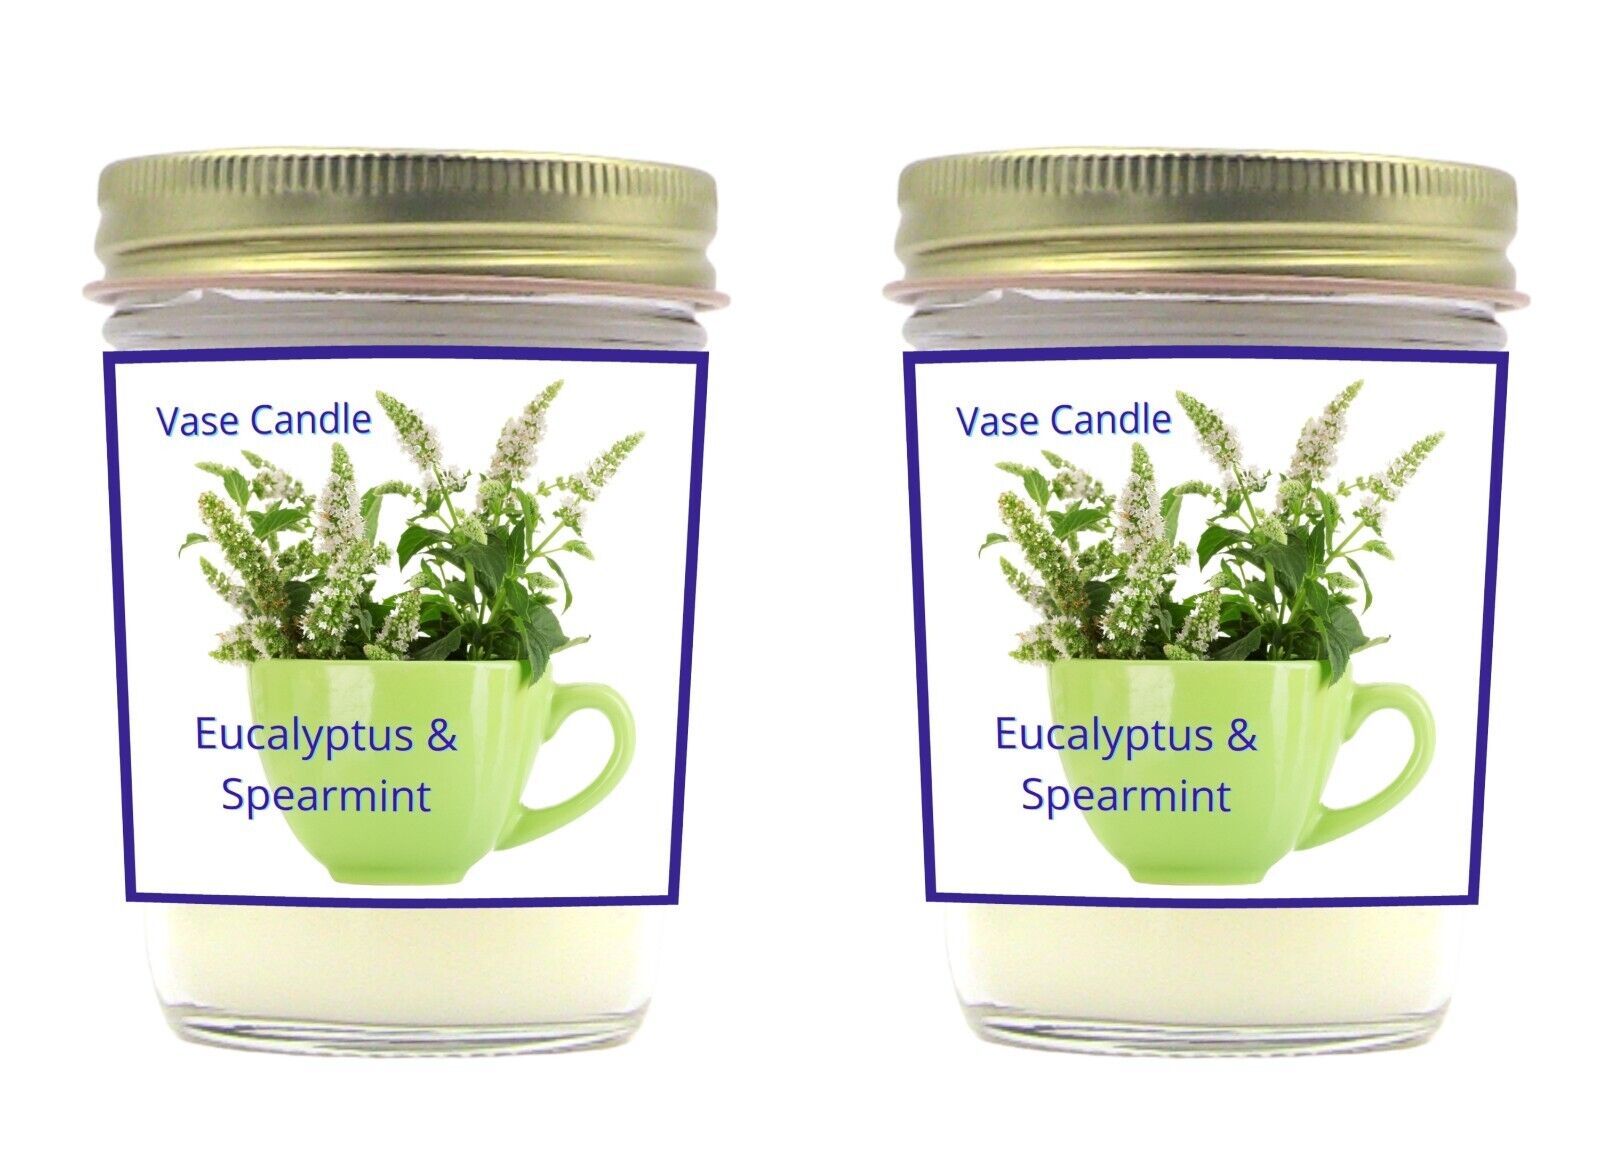 Eucalyptus Spearmint - A Cool Minty Scent With Hints Of Eucalyptus | Vase Candle